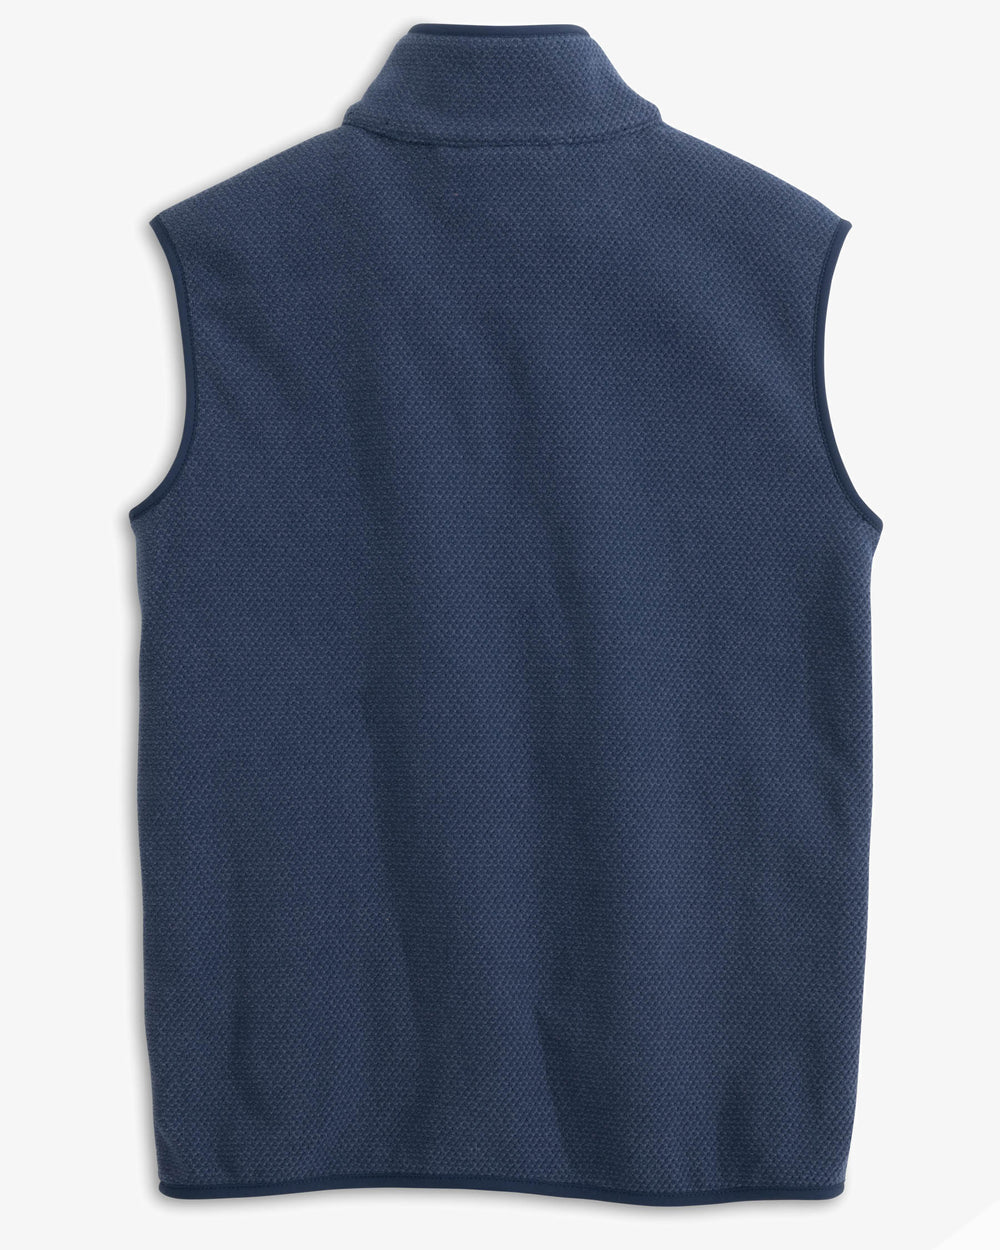 The back view of the Youth Hucksley Vest by Southern Tide - True Navy